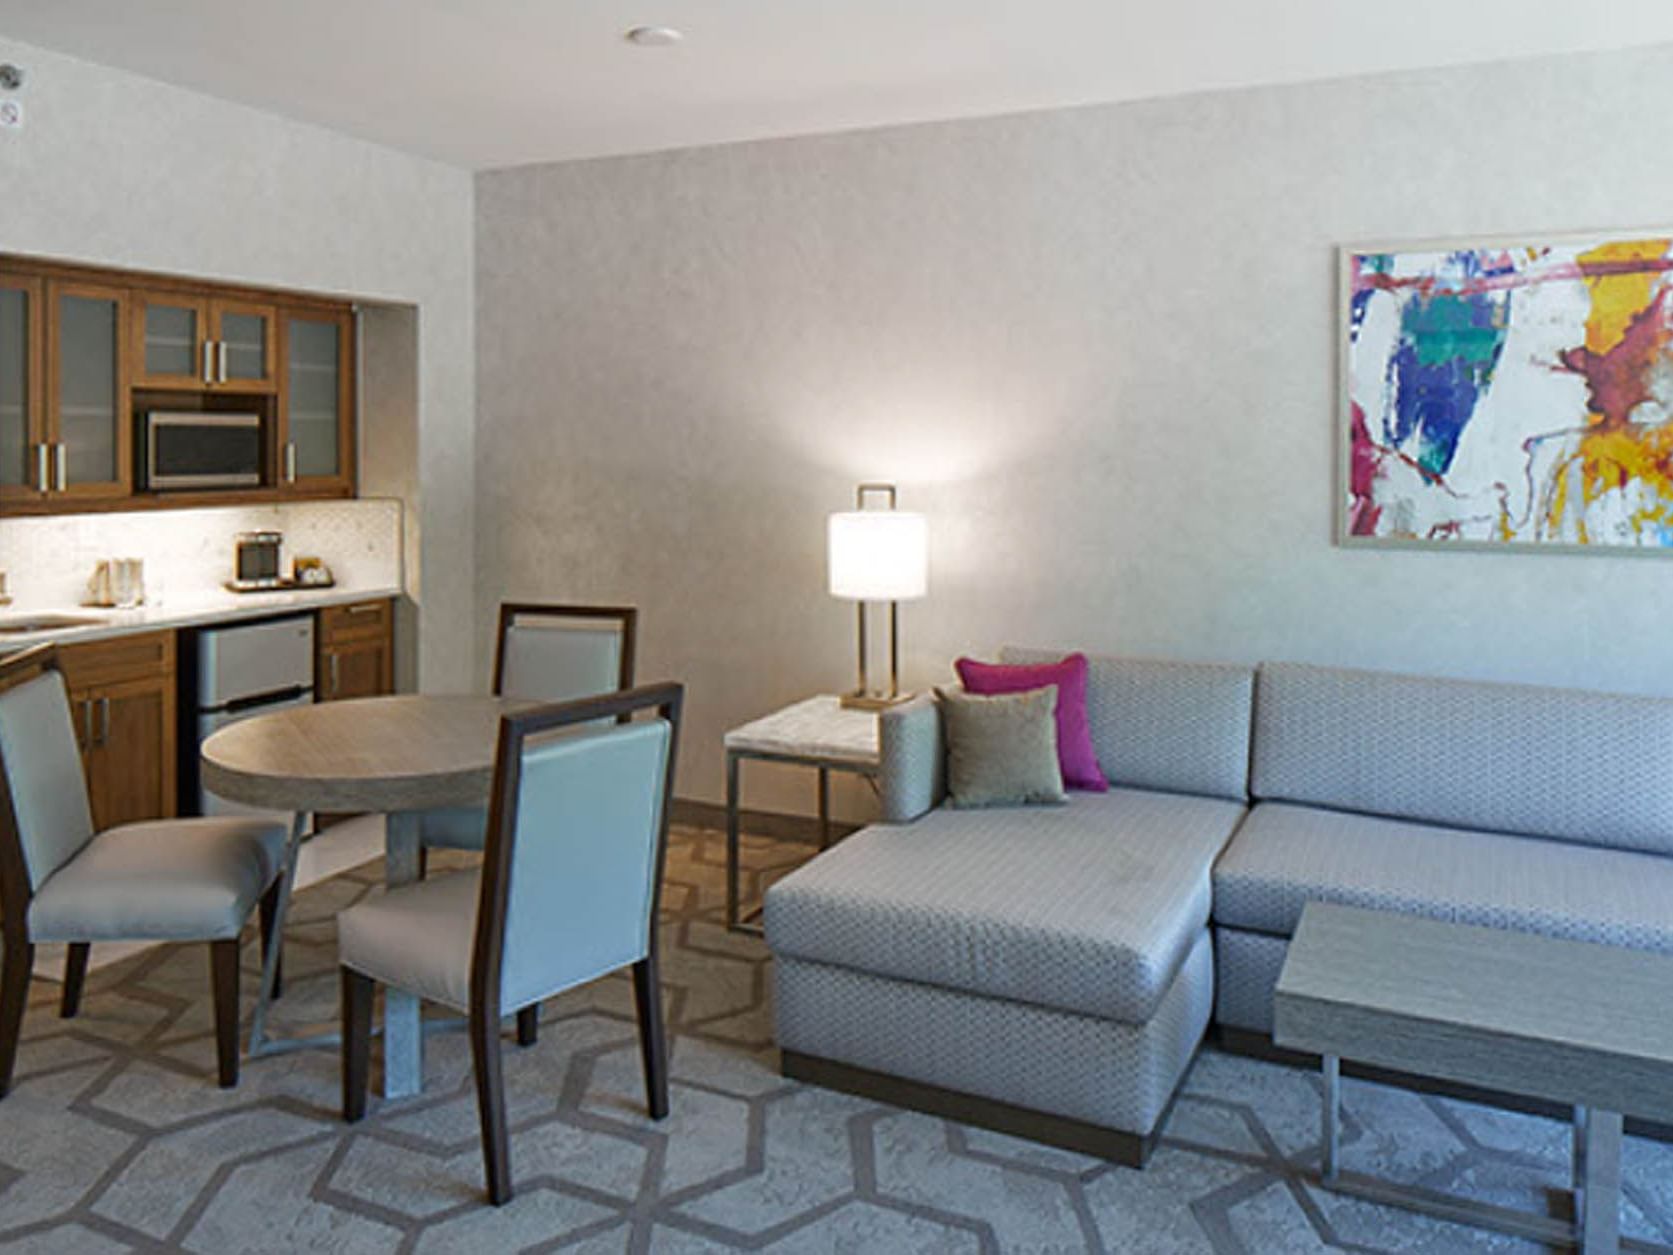 Living area of the bloom filed suite at the Kingsley Bloomfield